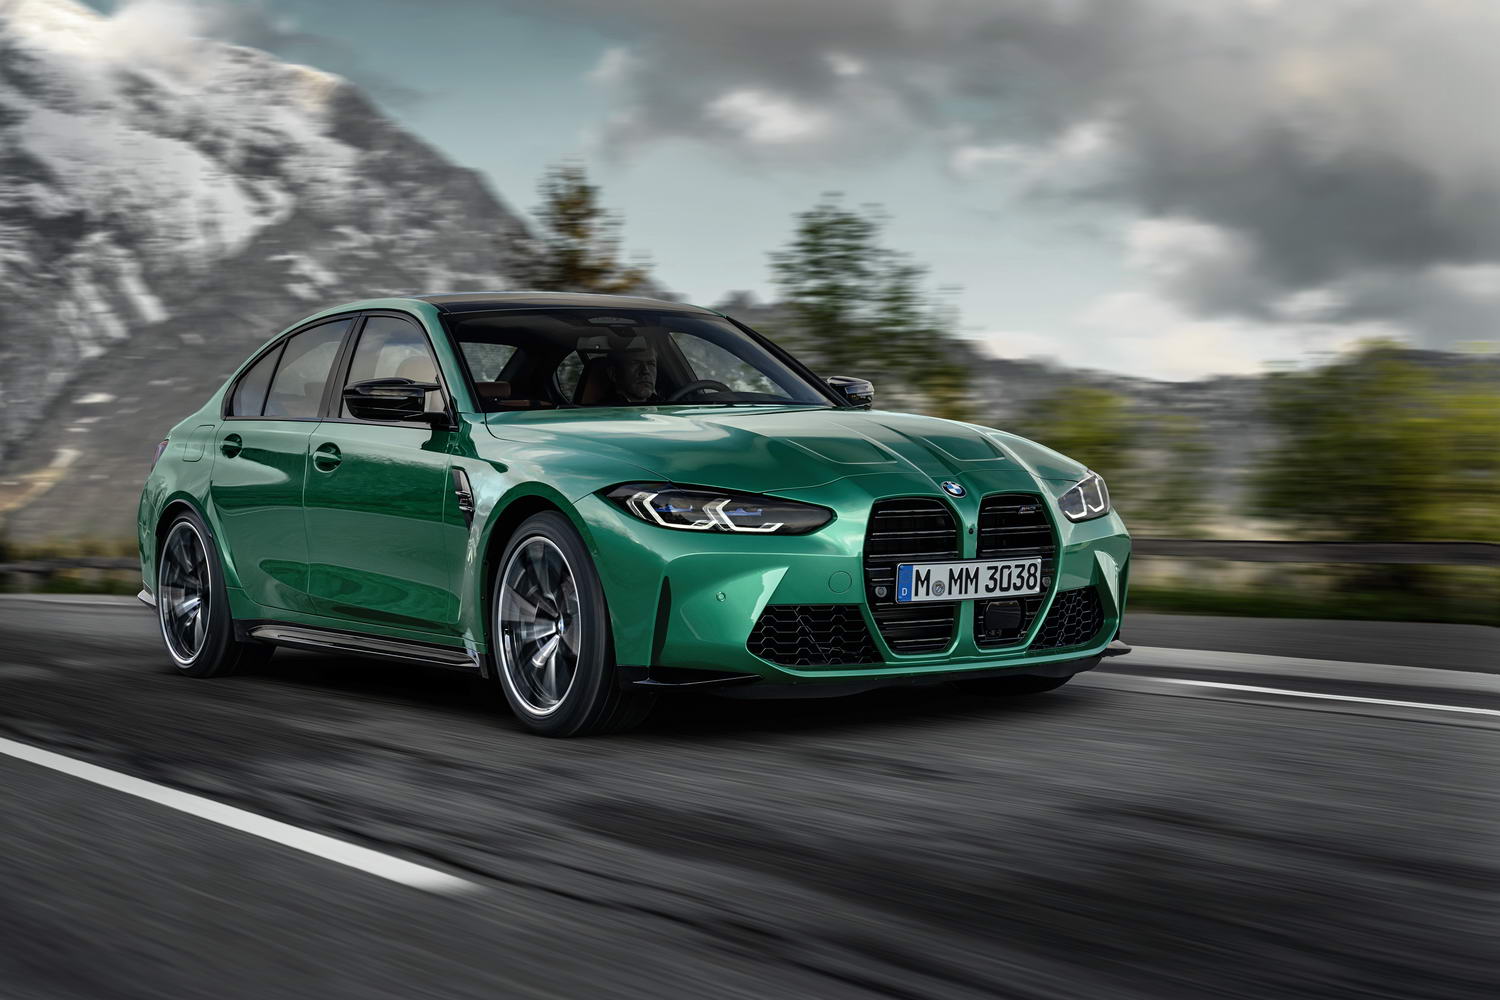 2021 BMW M3 Saloon image gallery - car and motoring news by CompleteCar.ie